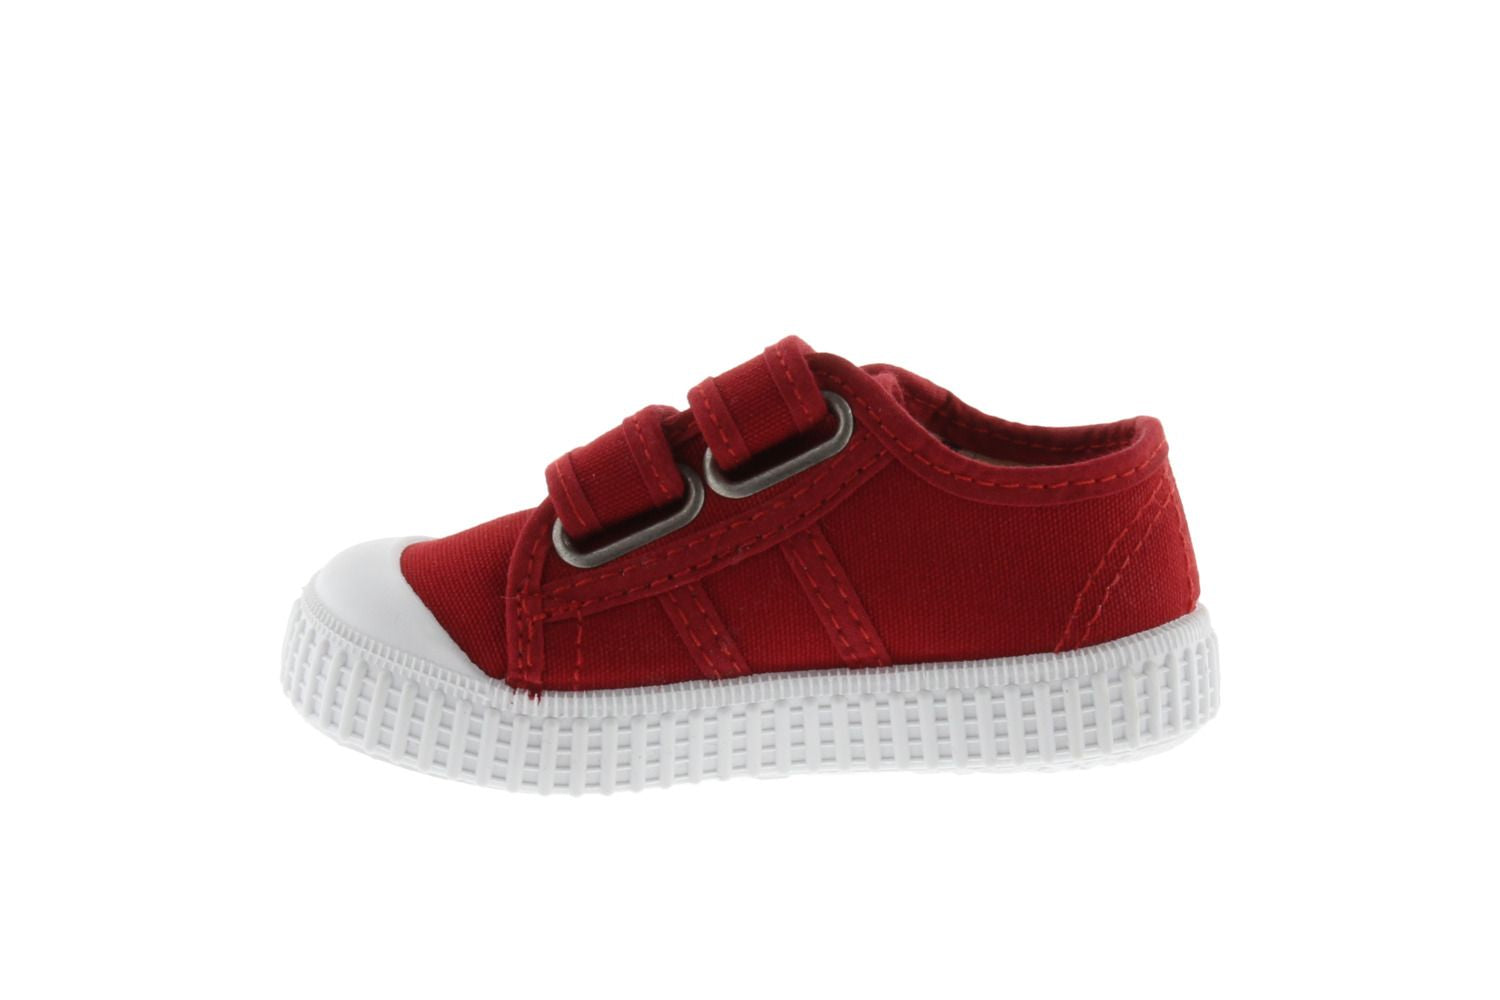 RED Canvas Oxfords Girls Infant Toddler 1-10 PITTER PATTER- NEW AND  ADORABLE!v - Walmart.com